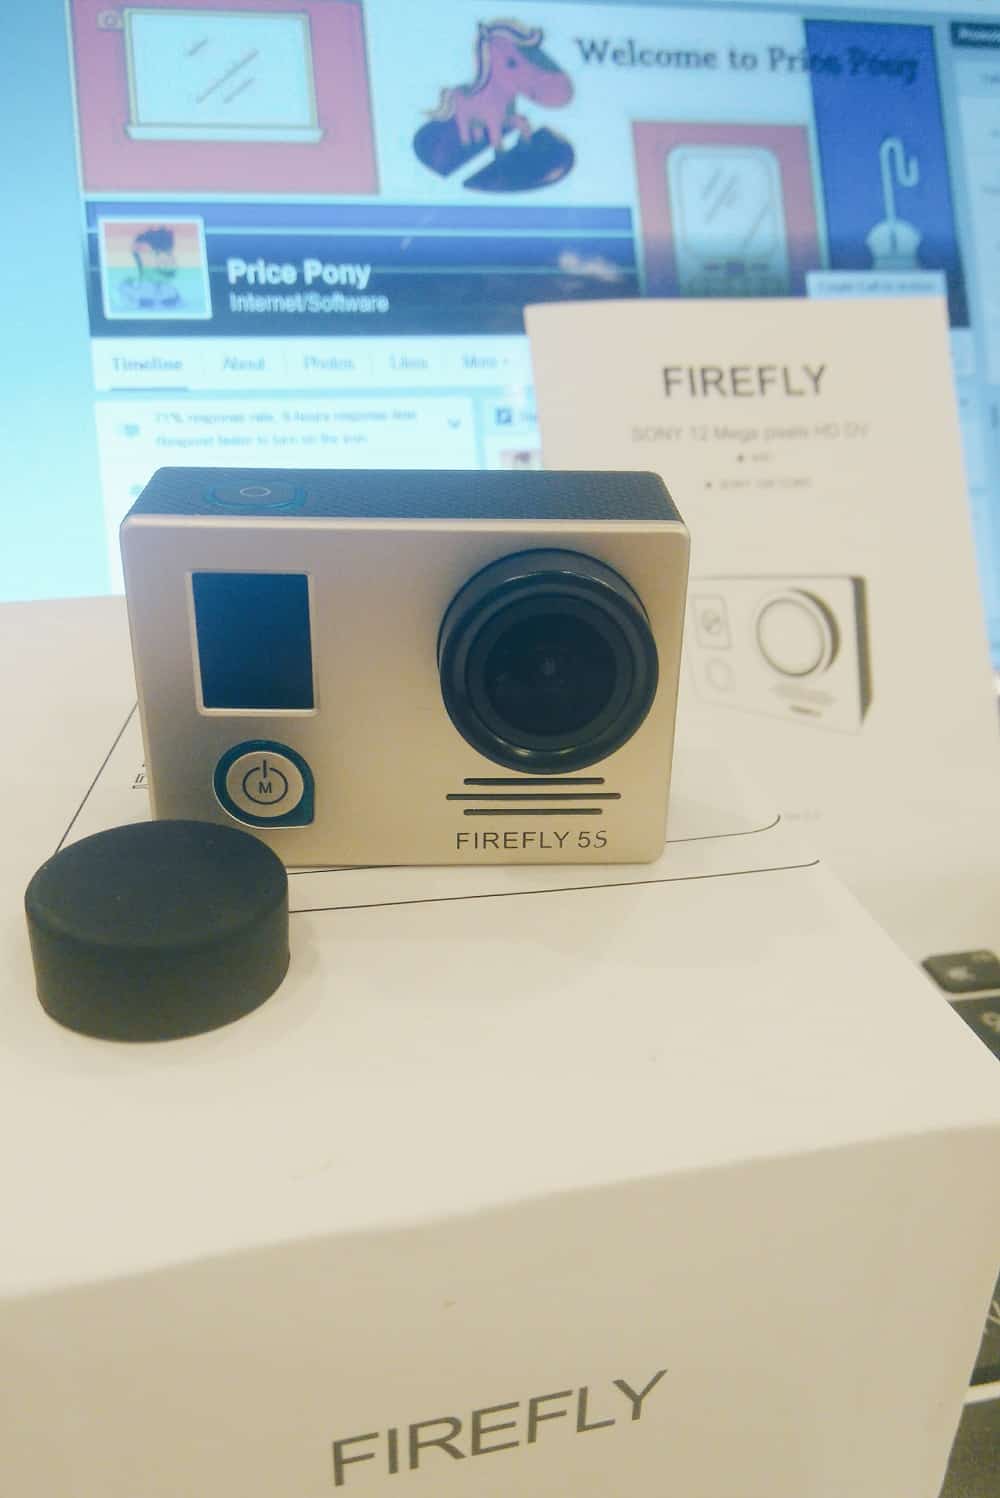 Welcome to PricePony, Firefly 5S :)